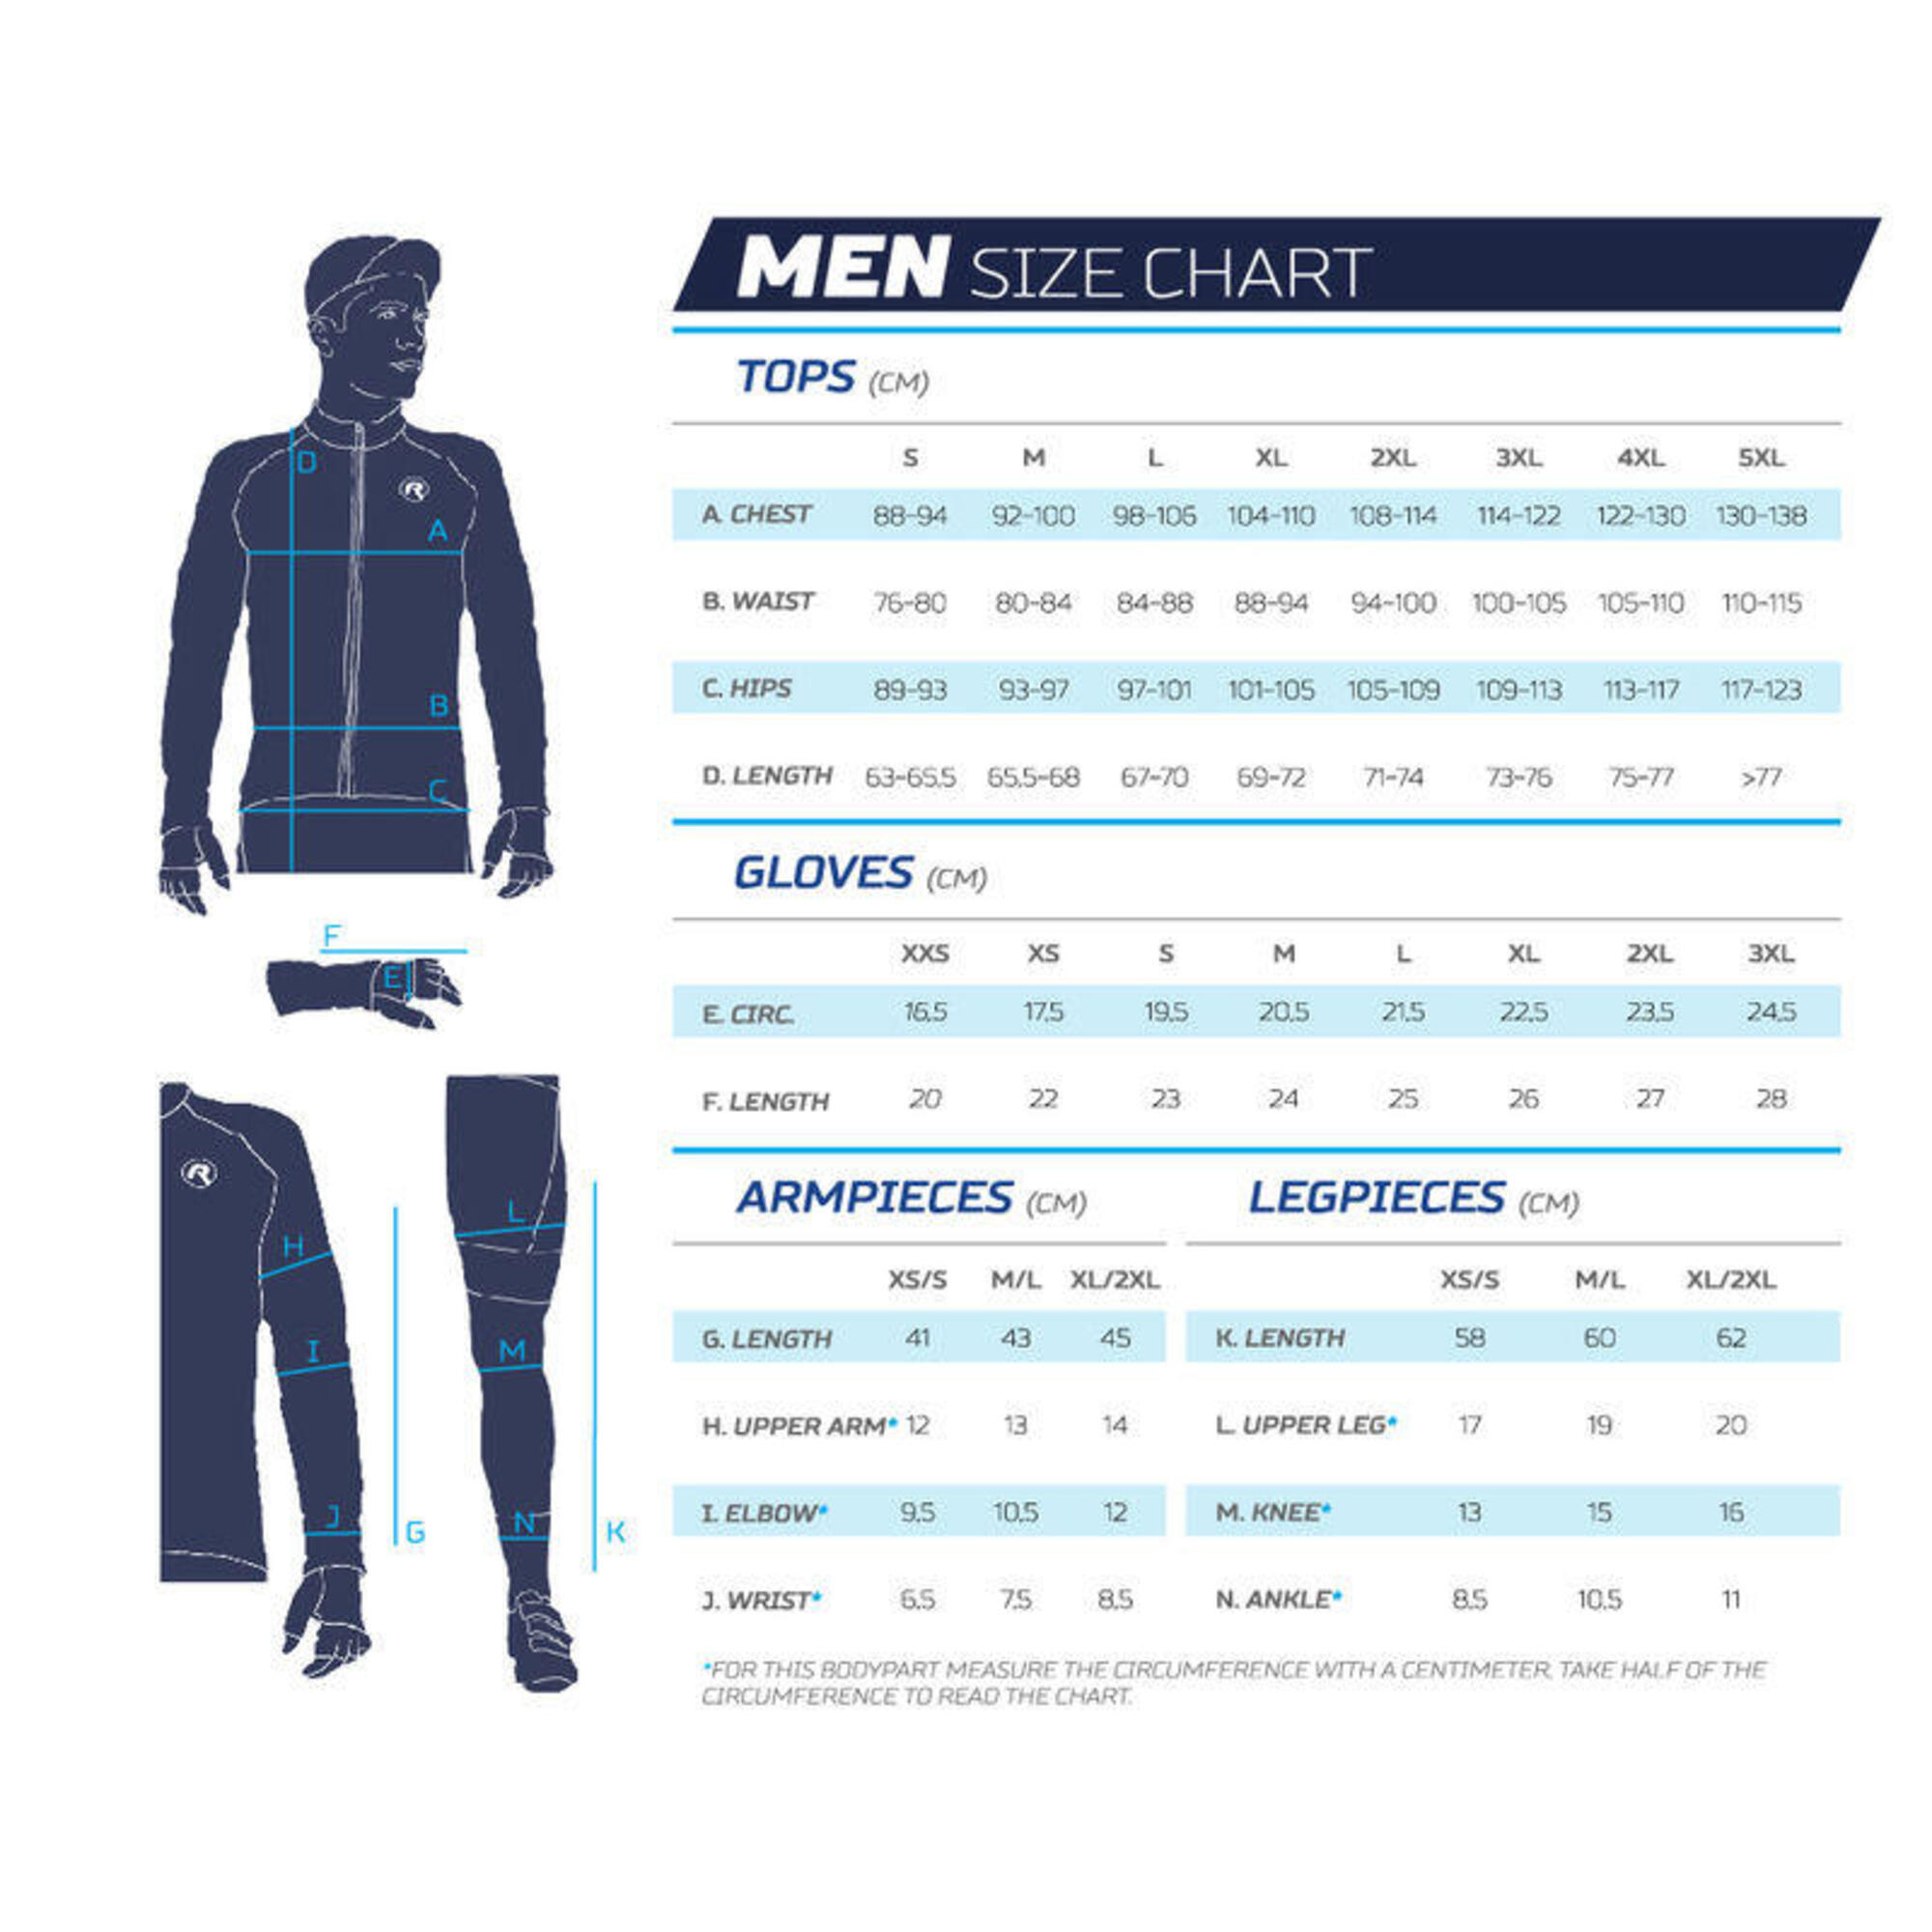 Maillot Manches Courtes Velo Homme - Core